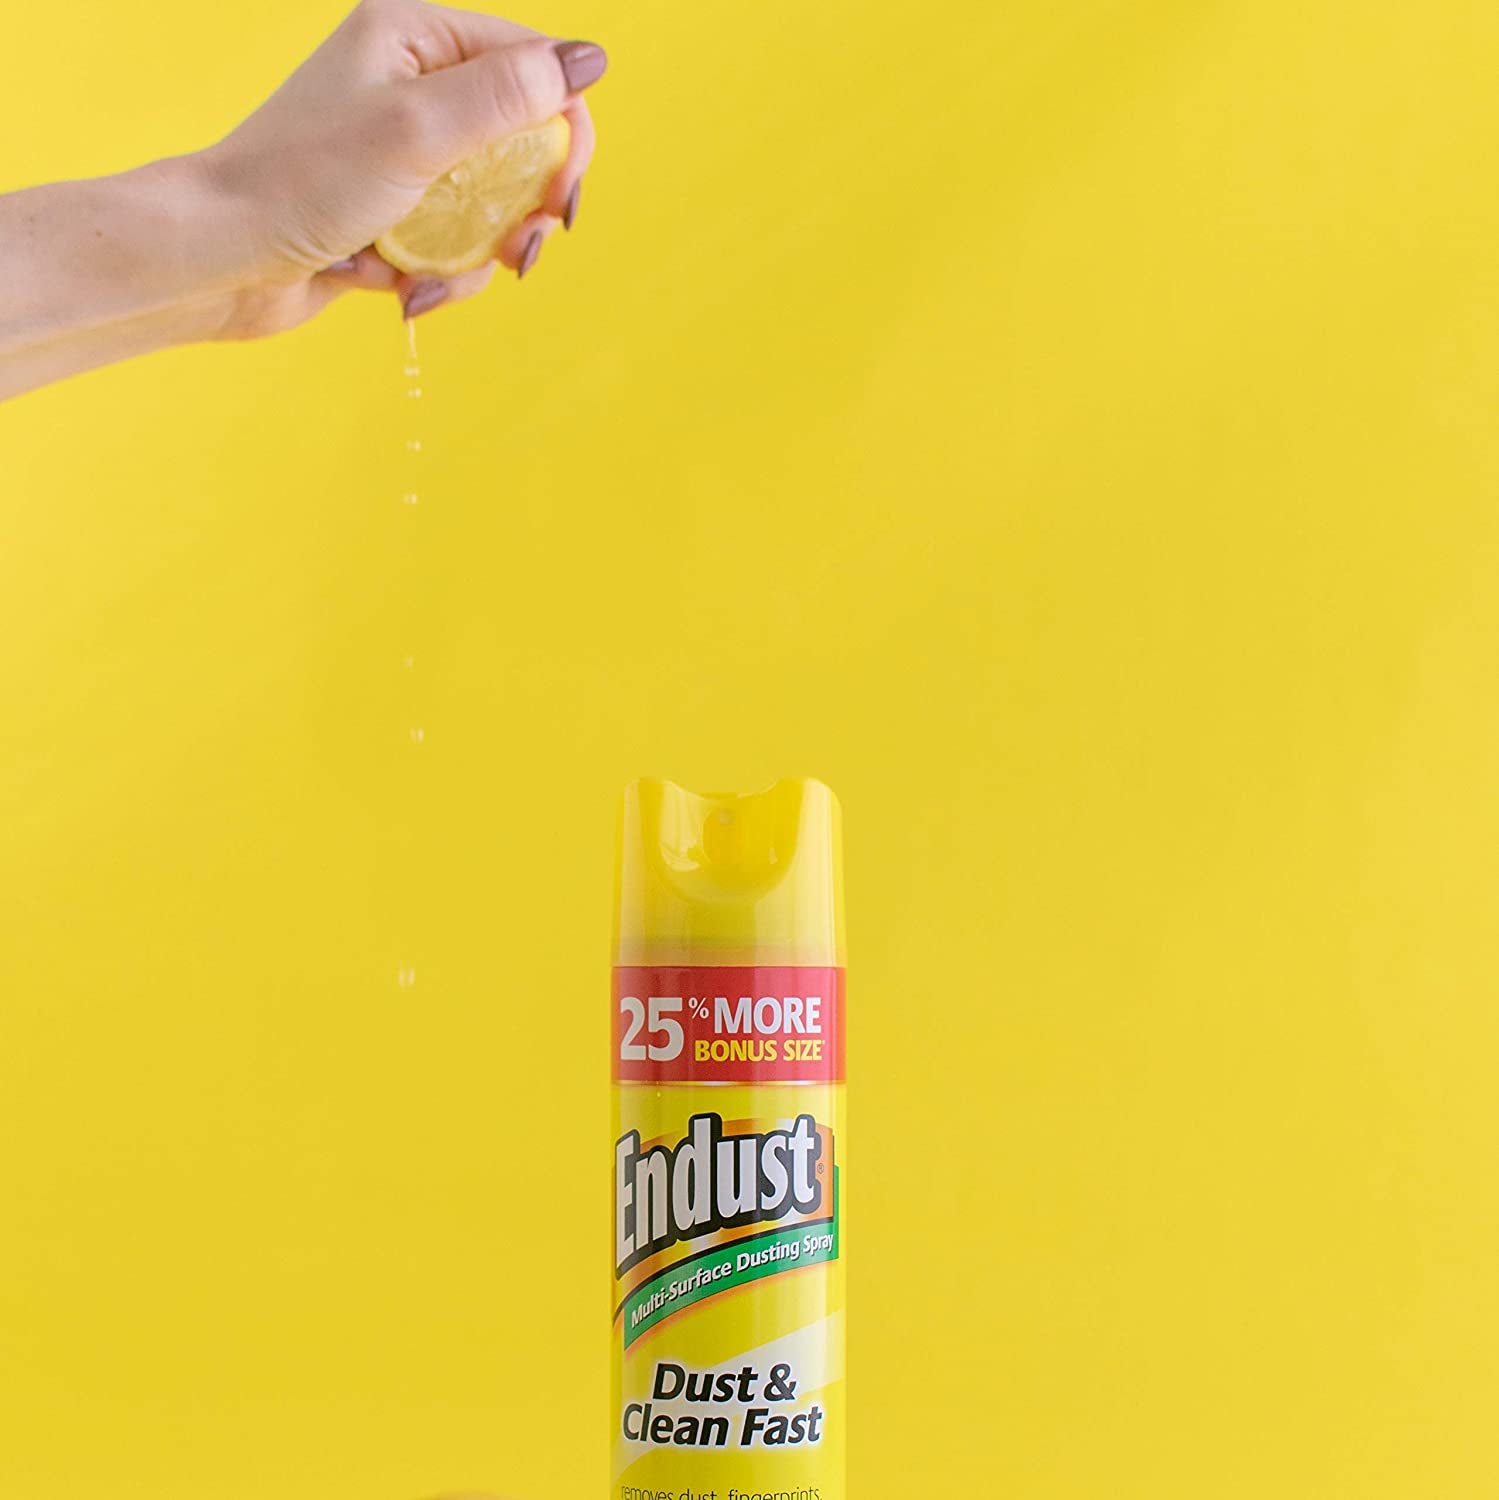 Endust Multi-Surface Dusting and Cleaning Spray, Lemon Zest, 12.5 Ounce (Pack of 2)